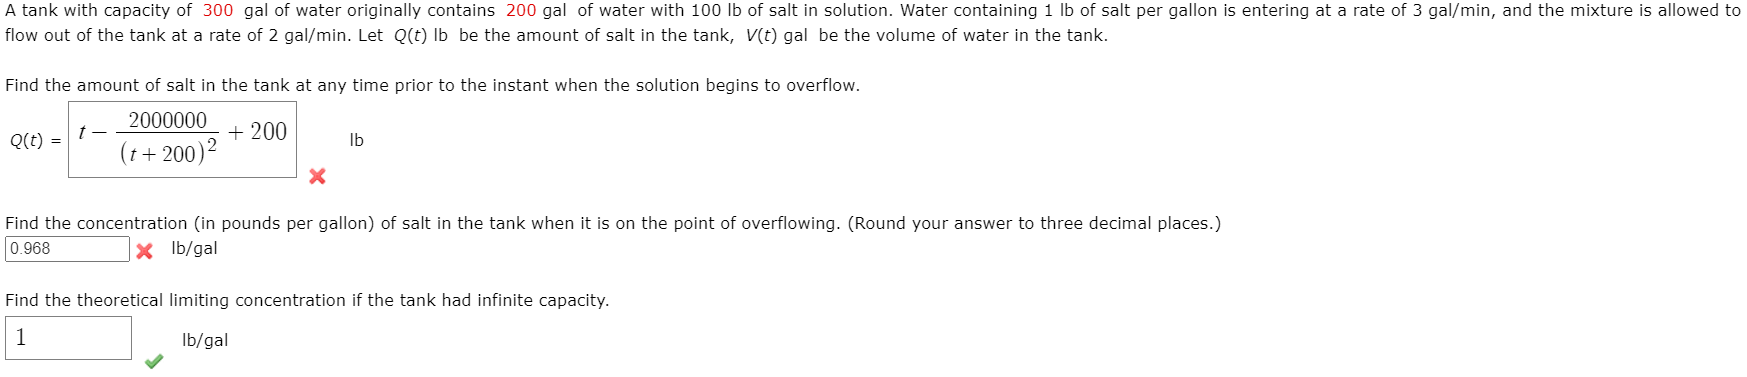 A tank with capacity of 300 gal of water originally contains 200 gal of water with 100 lb of salt in solution. Water containing 1 lb of salt per gallon is entering at a rate of 3 gal/min, and the mixture is allowed to
flow out of the tank at a rate of 2 gal/min. Let Q(t) Ib be the amount of salt in the tank, V(t) gal be the volume of water in the tank.
Find the amount of salt in the tank at any time prior to the instant when the solution begins to overflow.
2000000
+ 200
(t+ 200)2
Q(t) =
Ib
